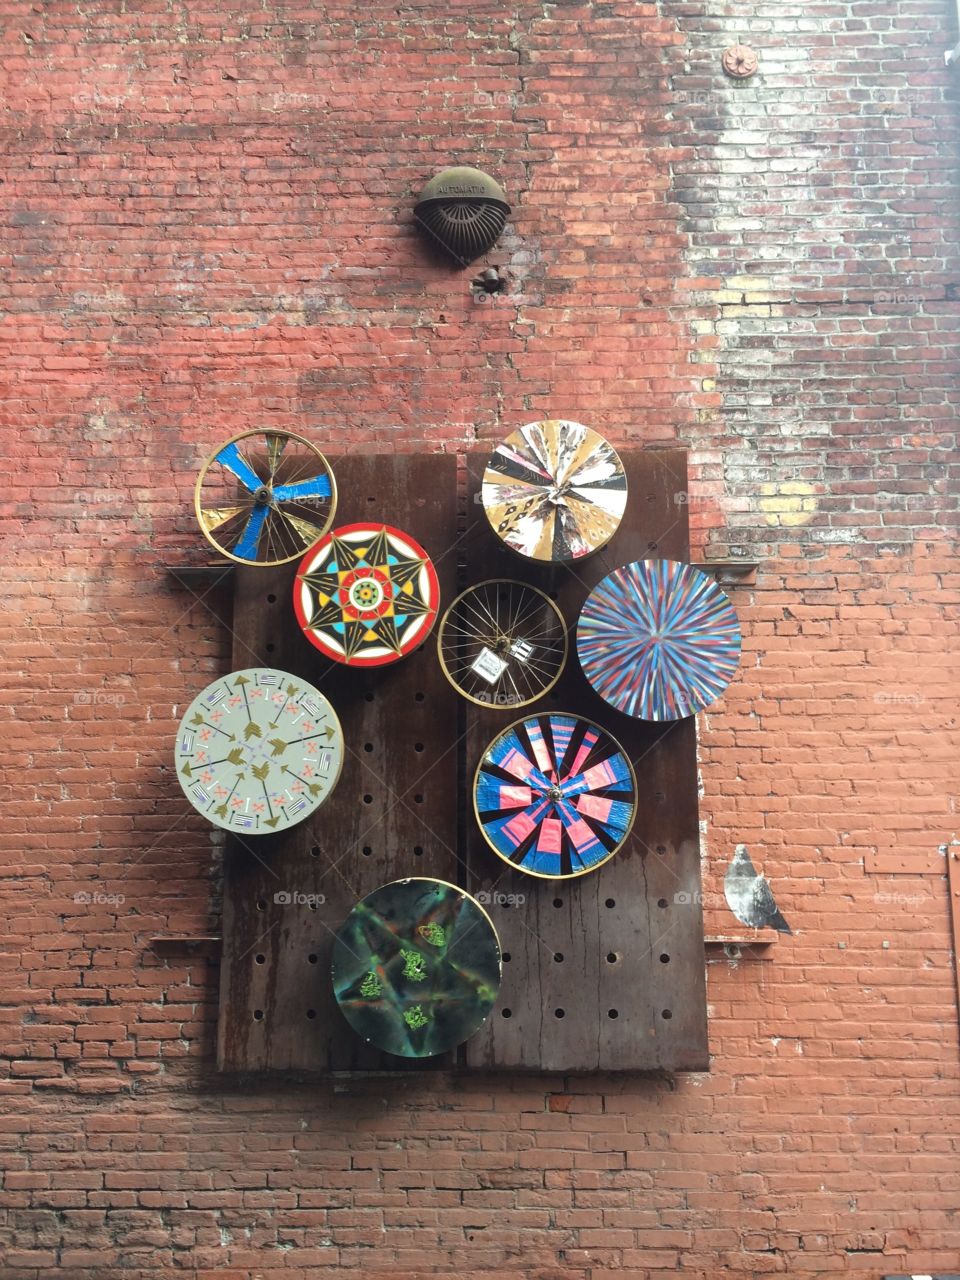 A collection of wind wheels on a piece of wood that's hanging on a city wall in an alley in Seattle.